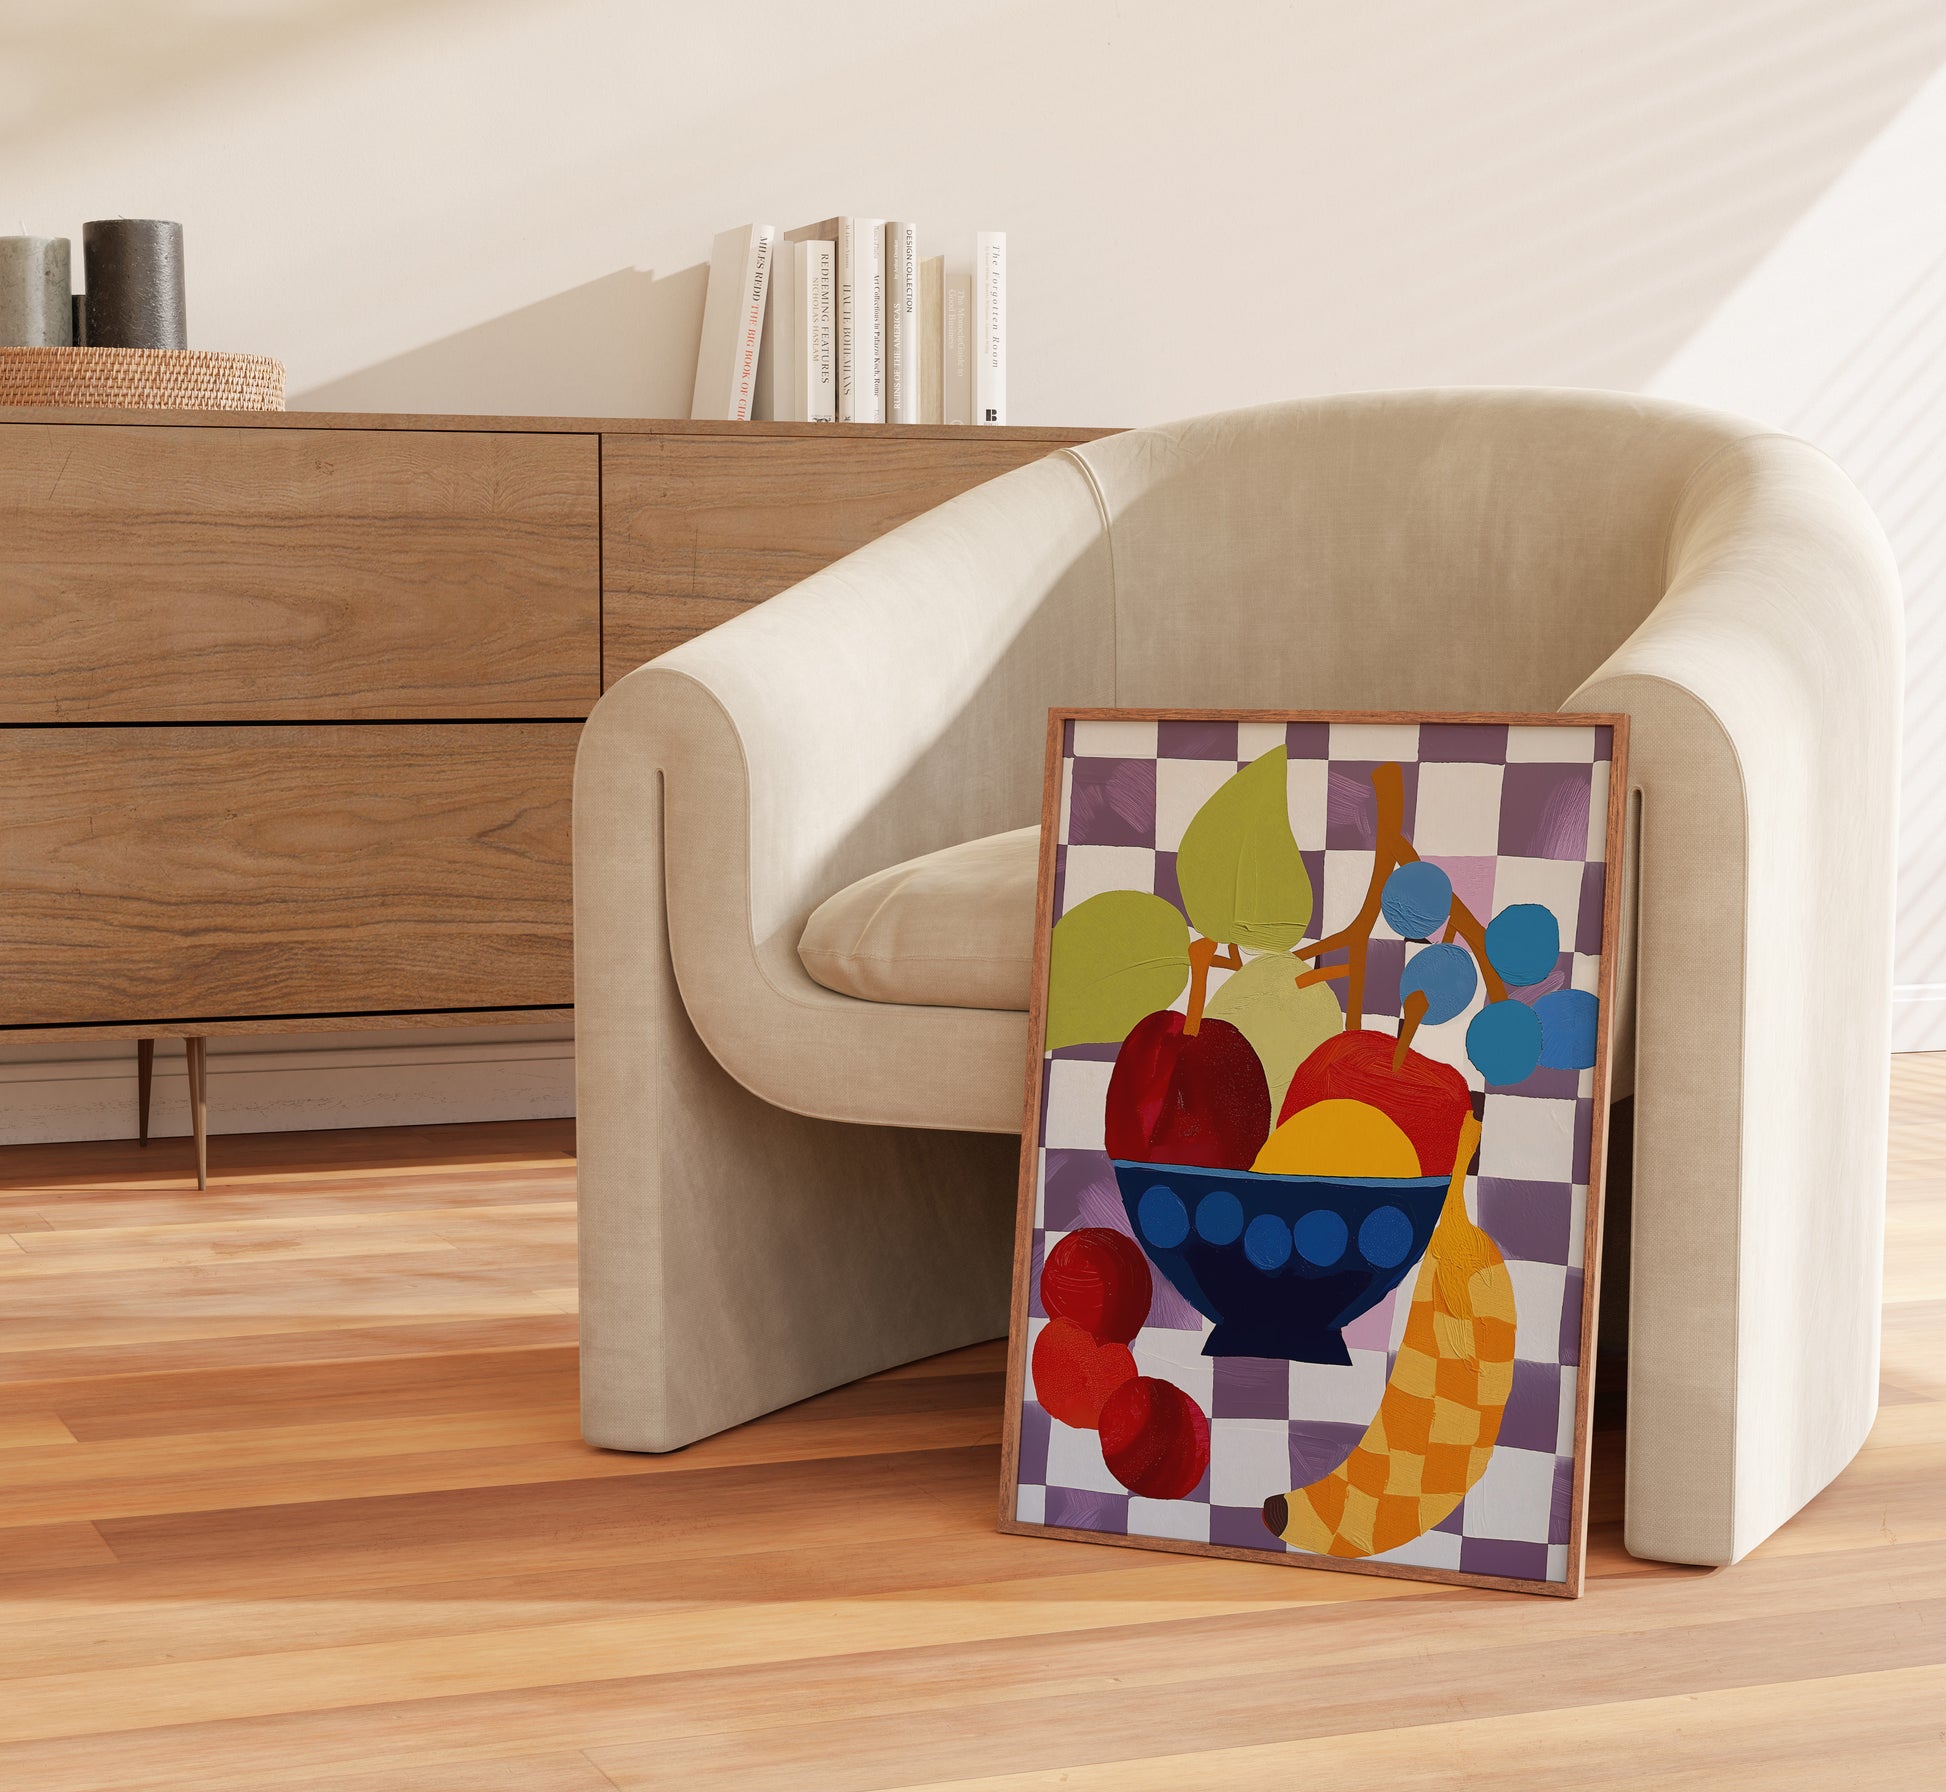 A modern armchair with a colorful abstract painting leaning against it in a stylish interior.